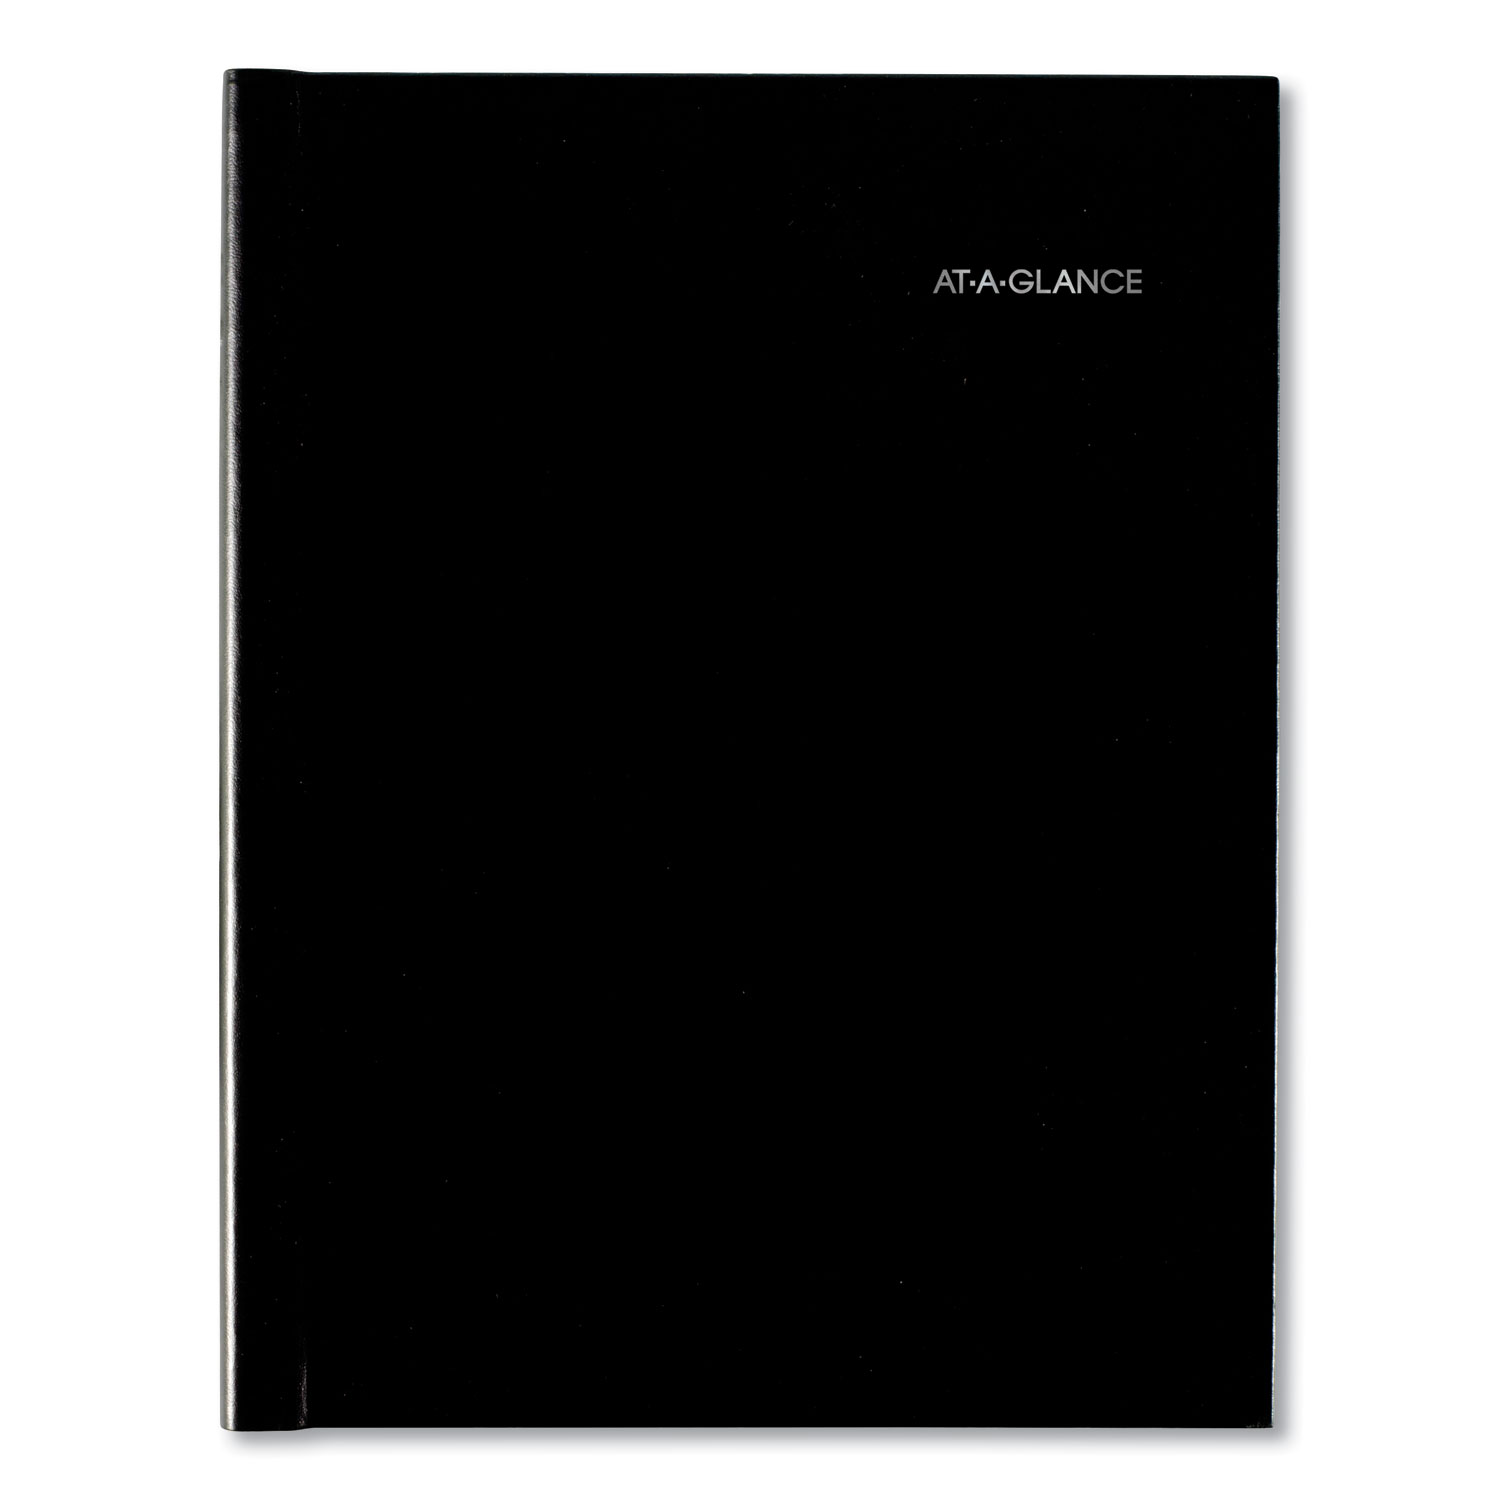  AT-A-GLANCE G520H00 Hardcover Weekly Appointment Book, 11 x 8, Black, 2020 (AAGG520H00) 